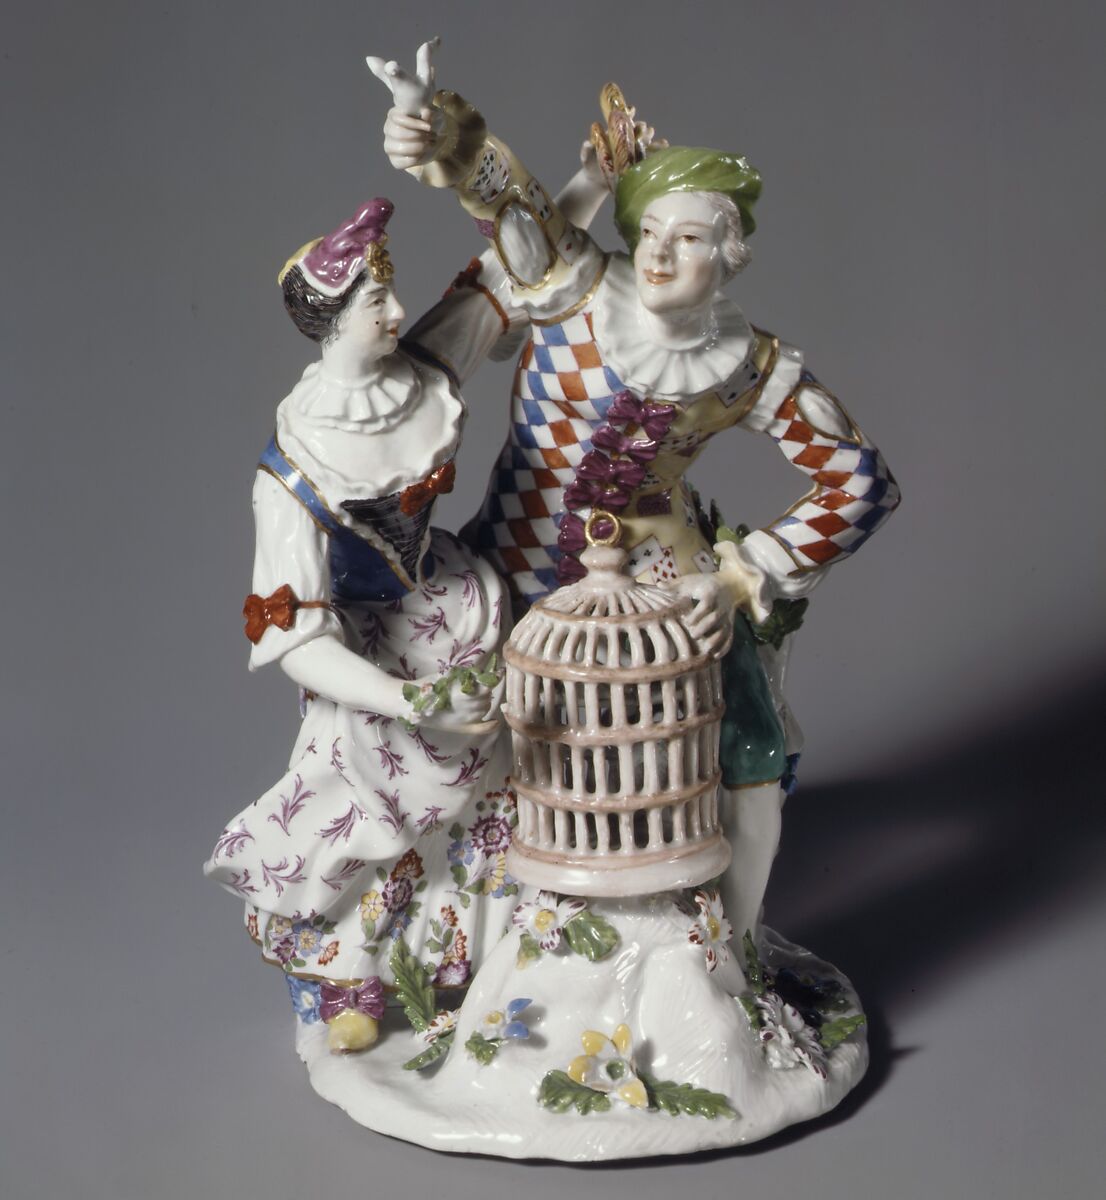 Harlequin and Columbine with birdcage, Ansbach Pottery and Porcelain Manufactory (German, 1758–1860), Hard-paste porcelain, German, Ansbach 